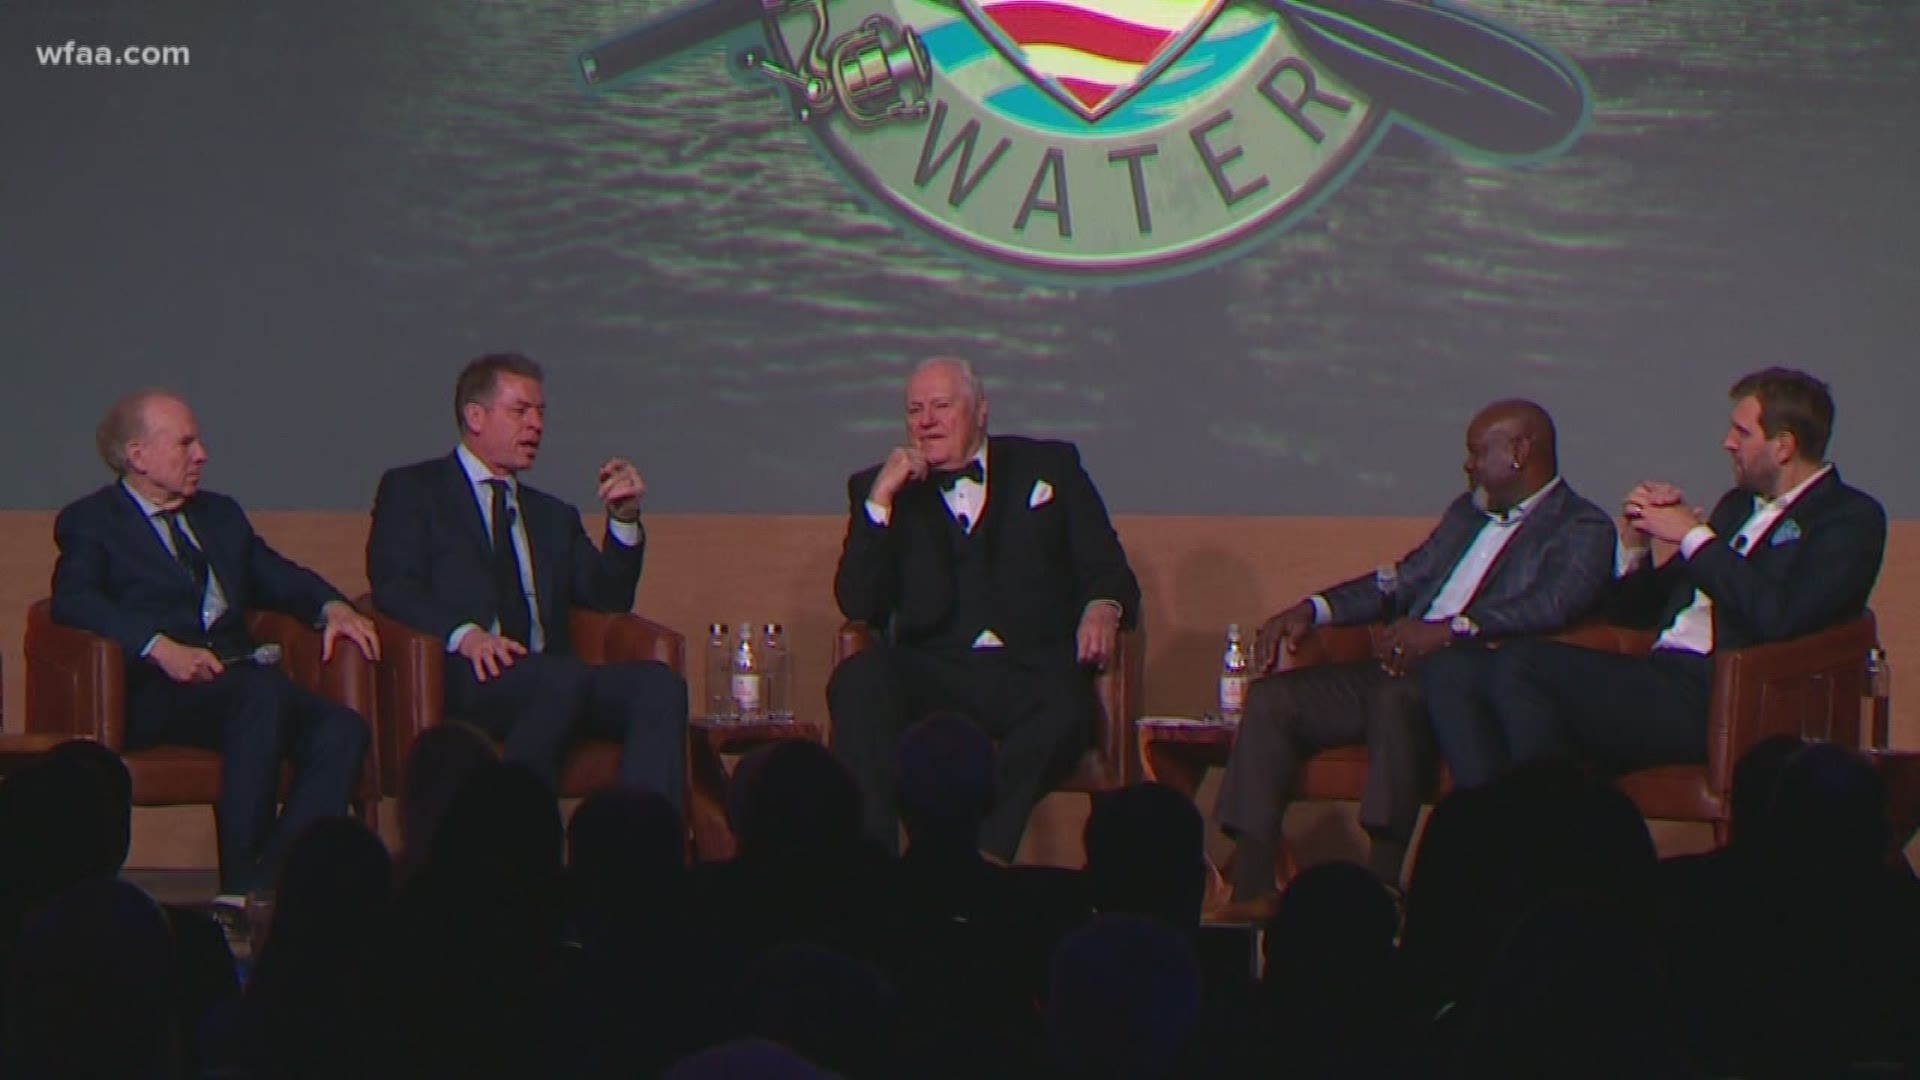 Roger Staubach, Troy Aikman, Emmitt Smith and Dirk Nowitzki joined Dale Hansen for the event benefitting Heroes on the Water.